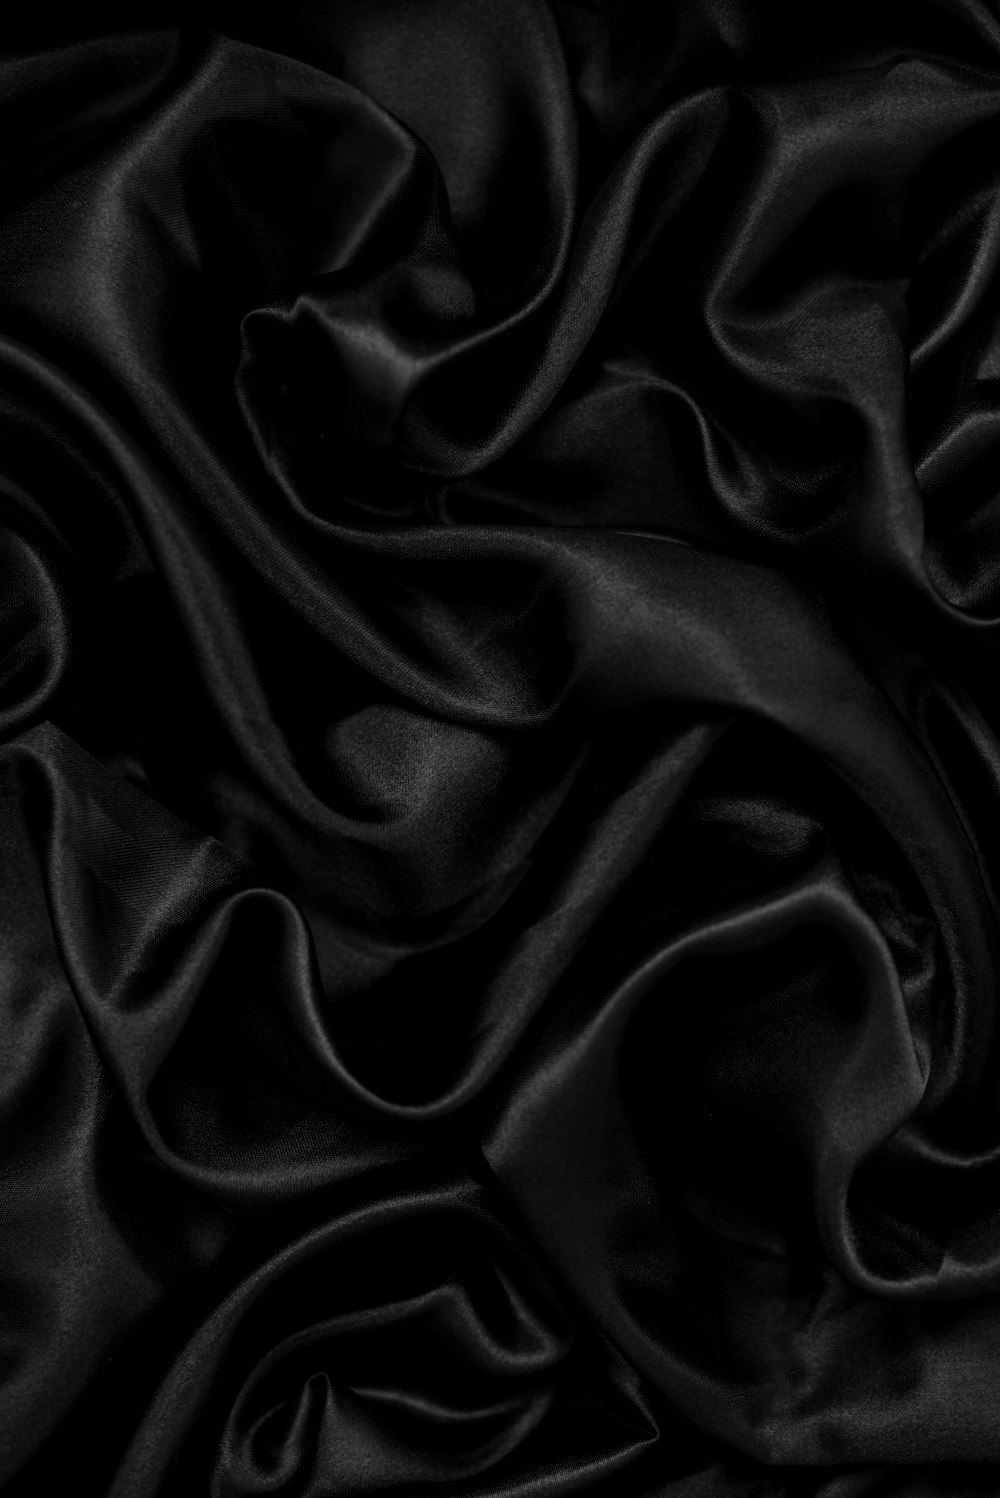 Black Fabric Pictures  Download Free Images on Unsplash